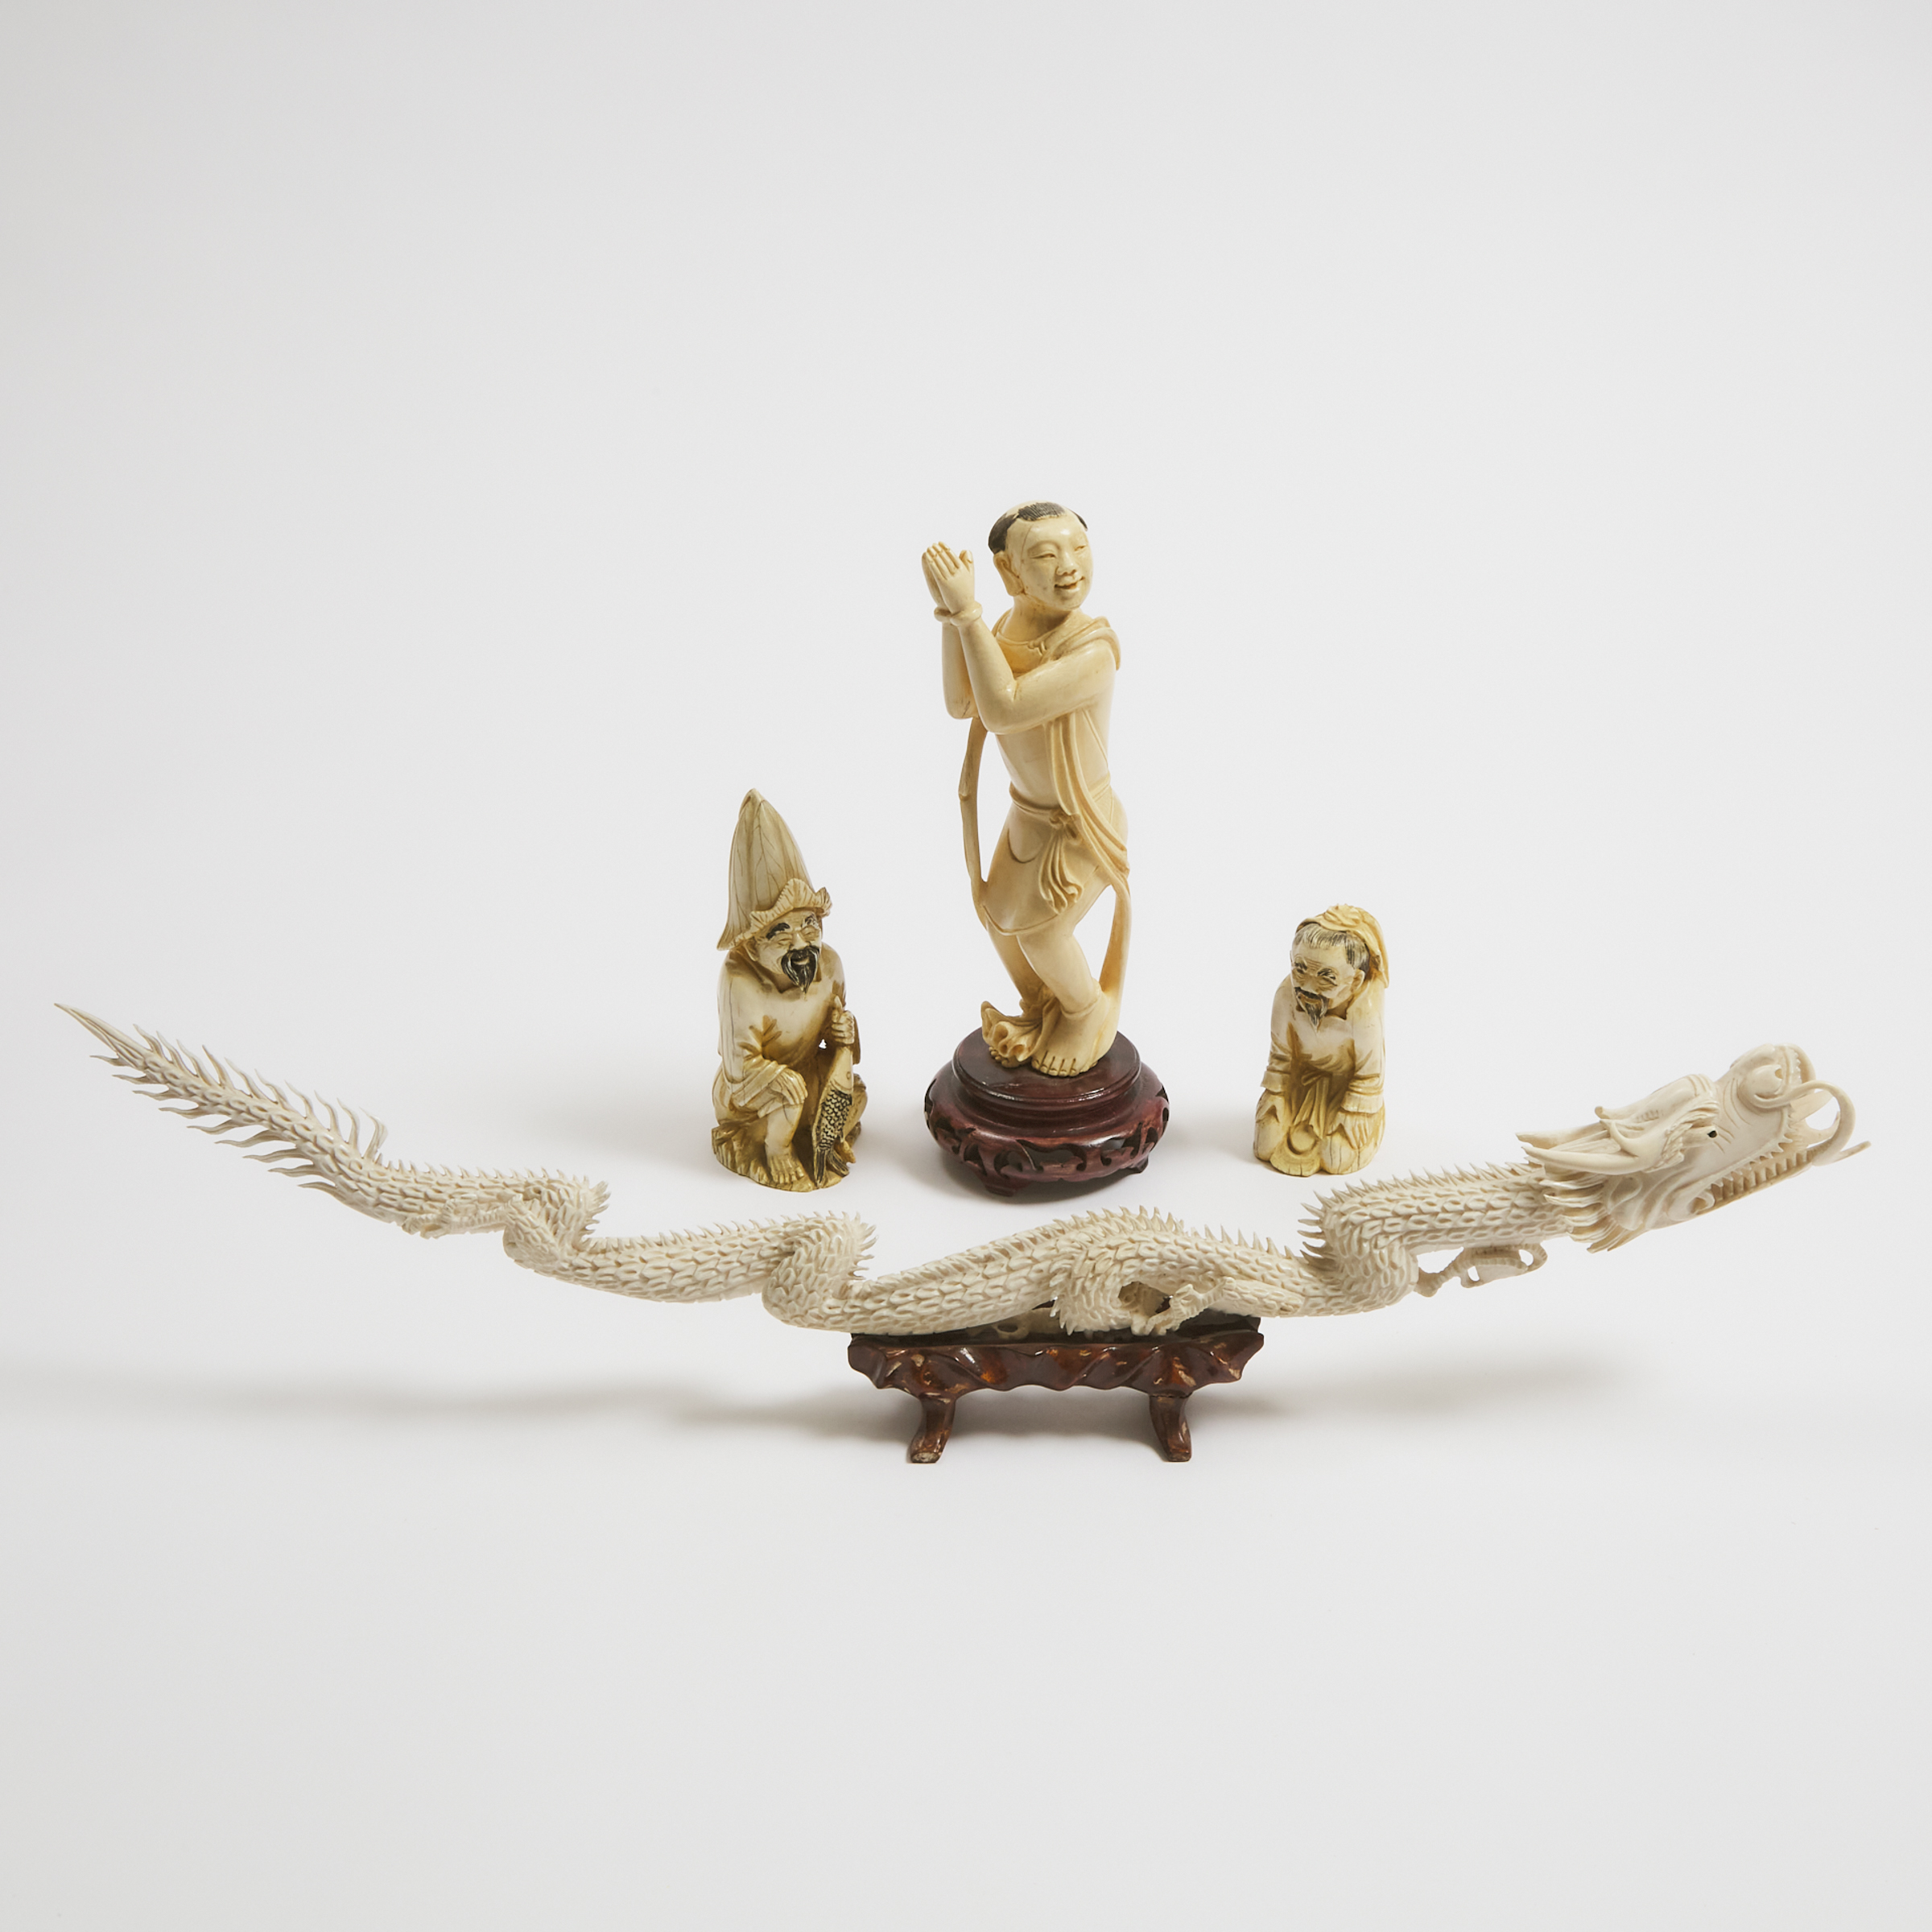 A Group of Four Ivory Carvings,